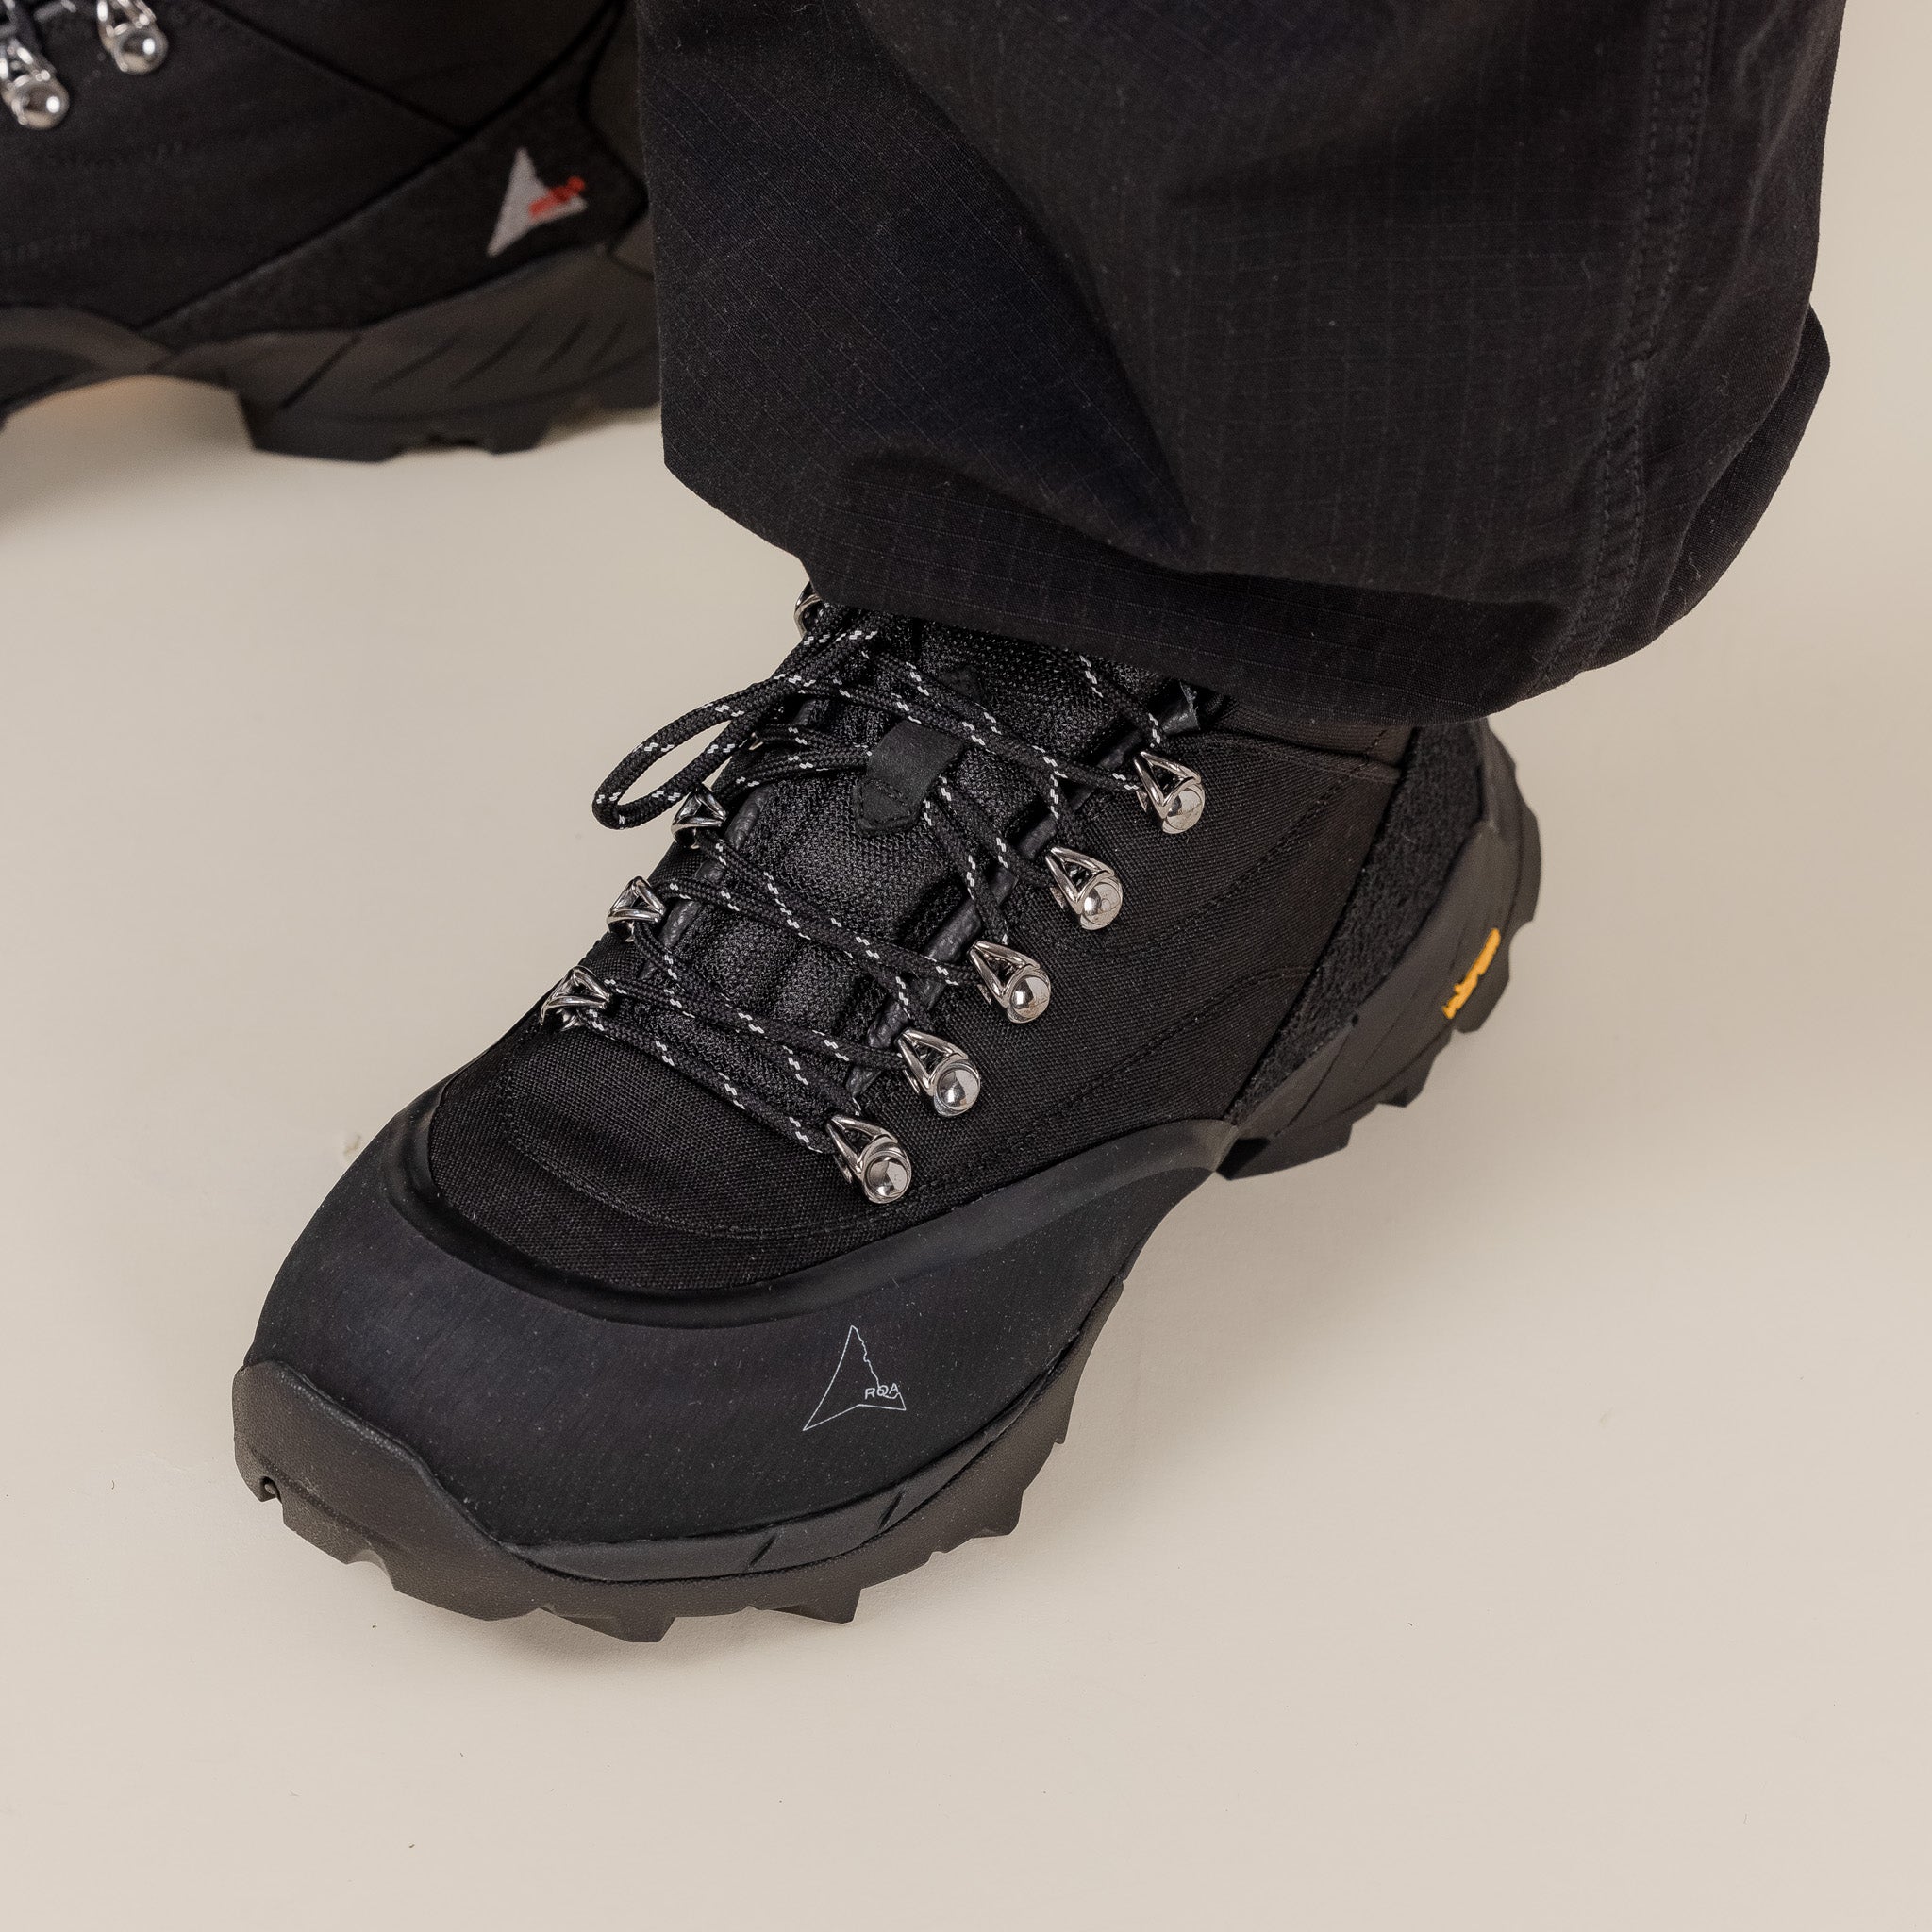 Roa Hiking - Updated Andreas Strap Hiking Boots - Black